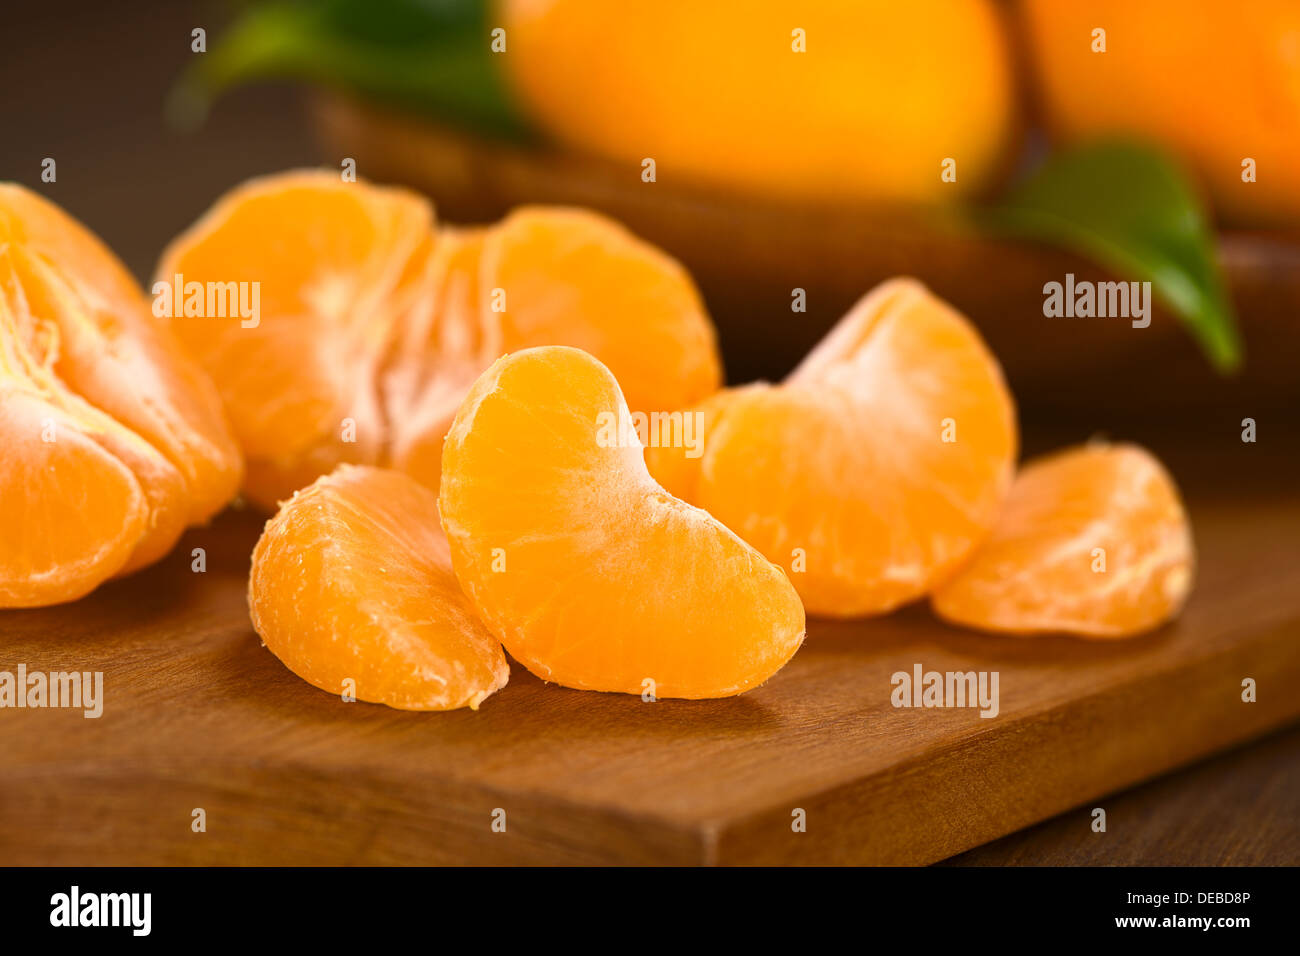 Mandarin segments on wooden board with mandarins in the back (Selective Focus, Focus on the front of the first mandarin segment) Stock Photo